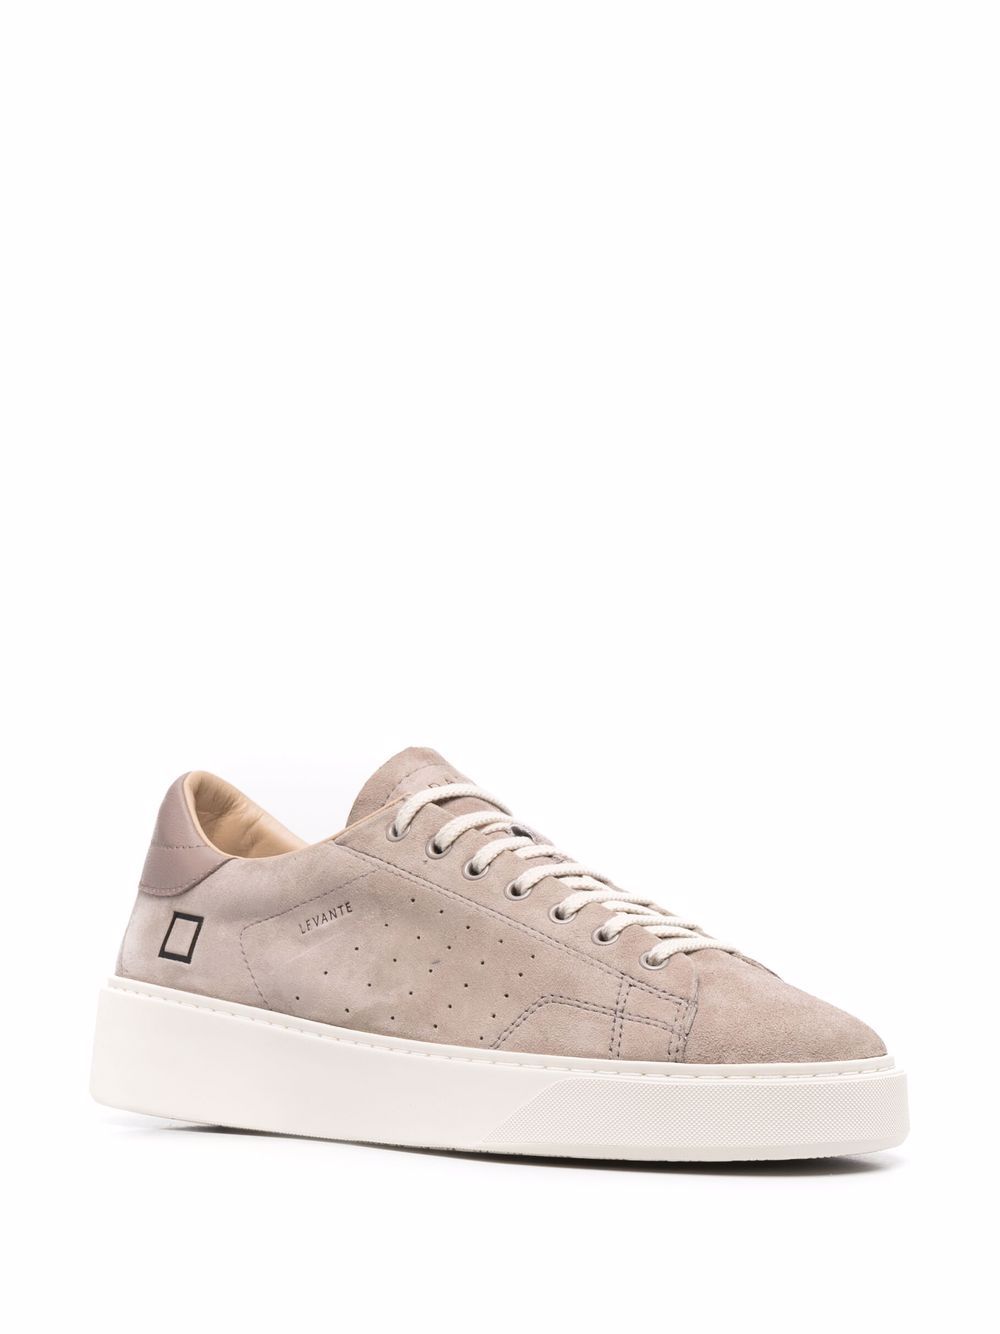 D.A.T.E. lace-up Leather Sneakers - Farfetch